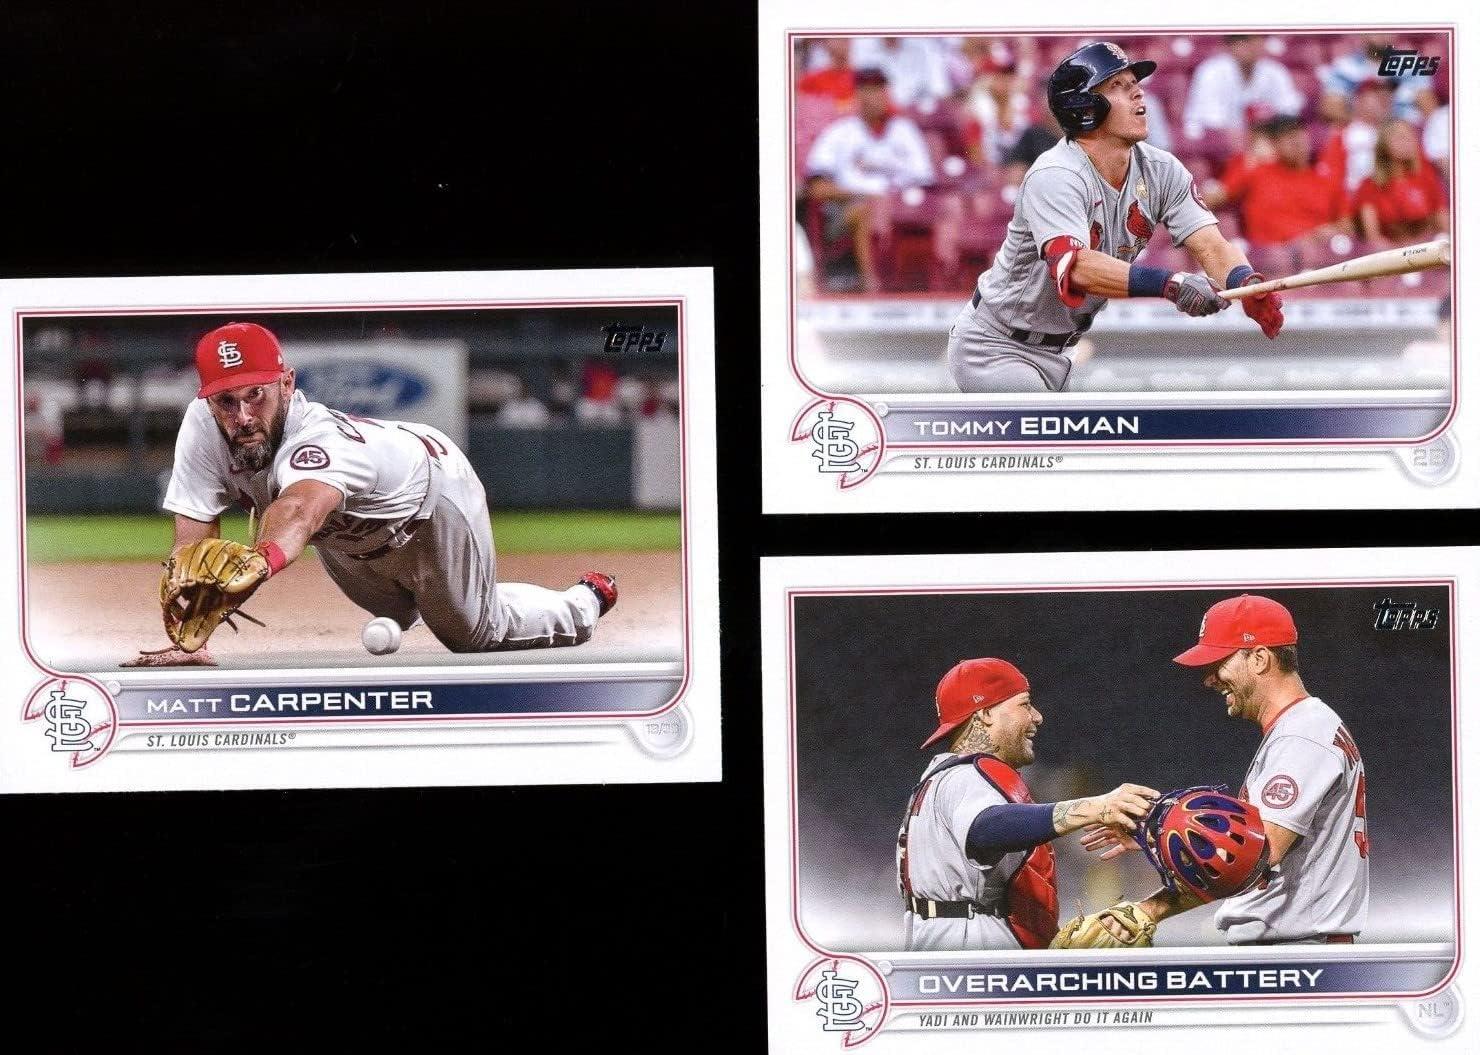  St Louis Cardinals 2019 Topps Factory Sealed Special Edition 17  Card Team Set with Adam Wainwright and Yadier Molina Plus